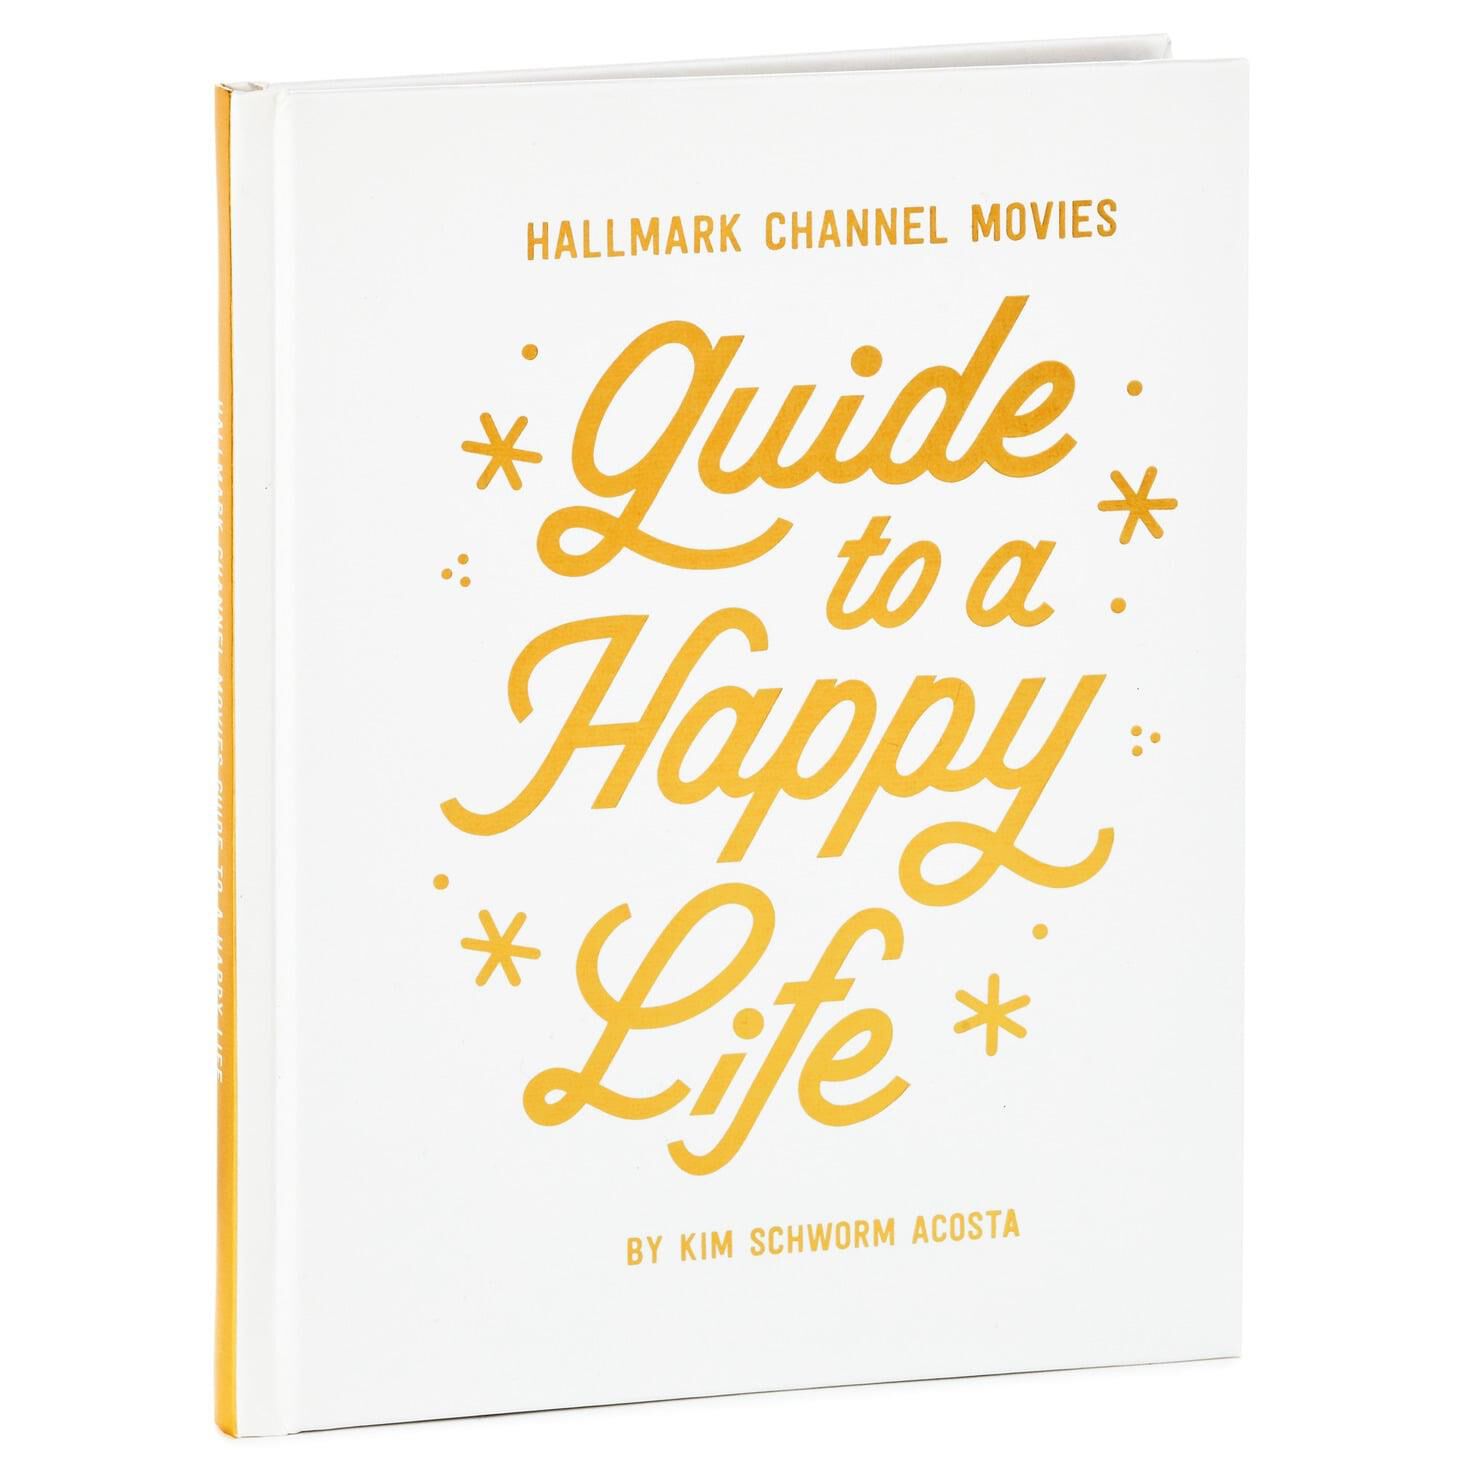 Hallmark Channel Movies Guide to a Happy Life Book for only USD 14.99 | Hallmark